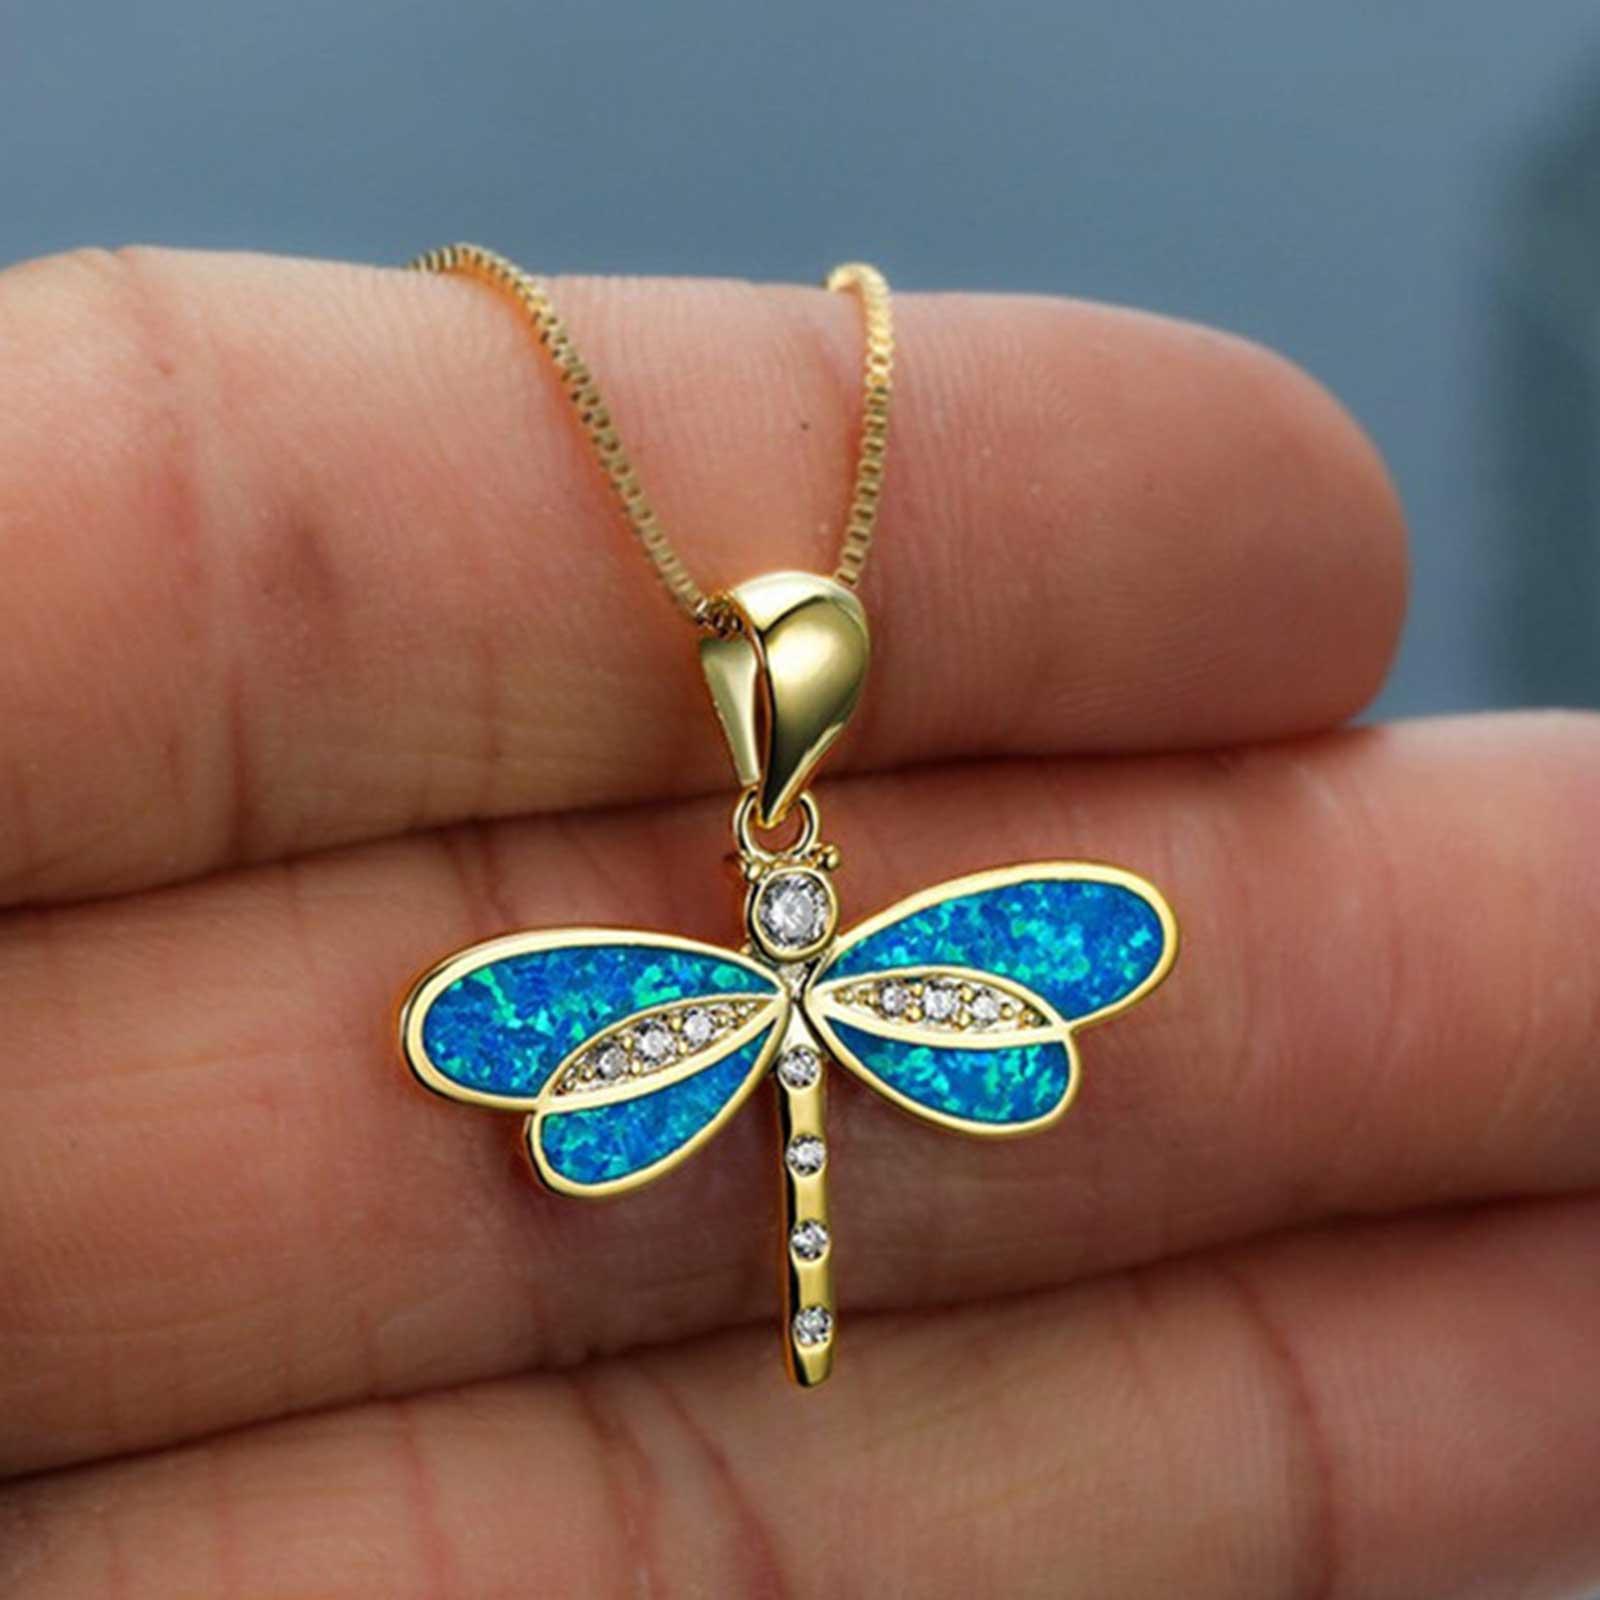 Dragonfly Necklace Pendant Choker For Women Girls White Gold Blue Silver Y5G3 - image 3 of 9